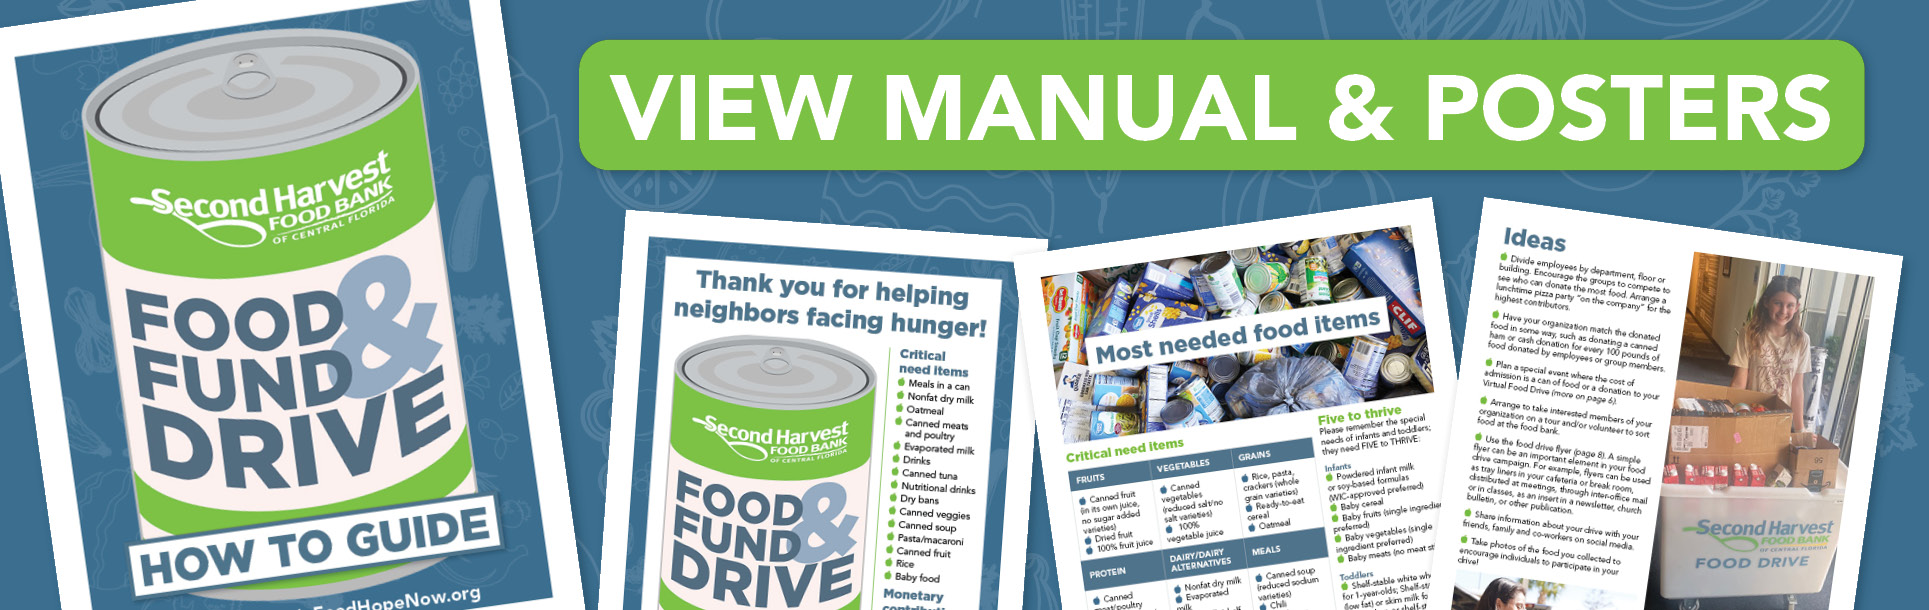 Download our food drive manual and posters